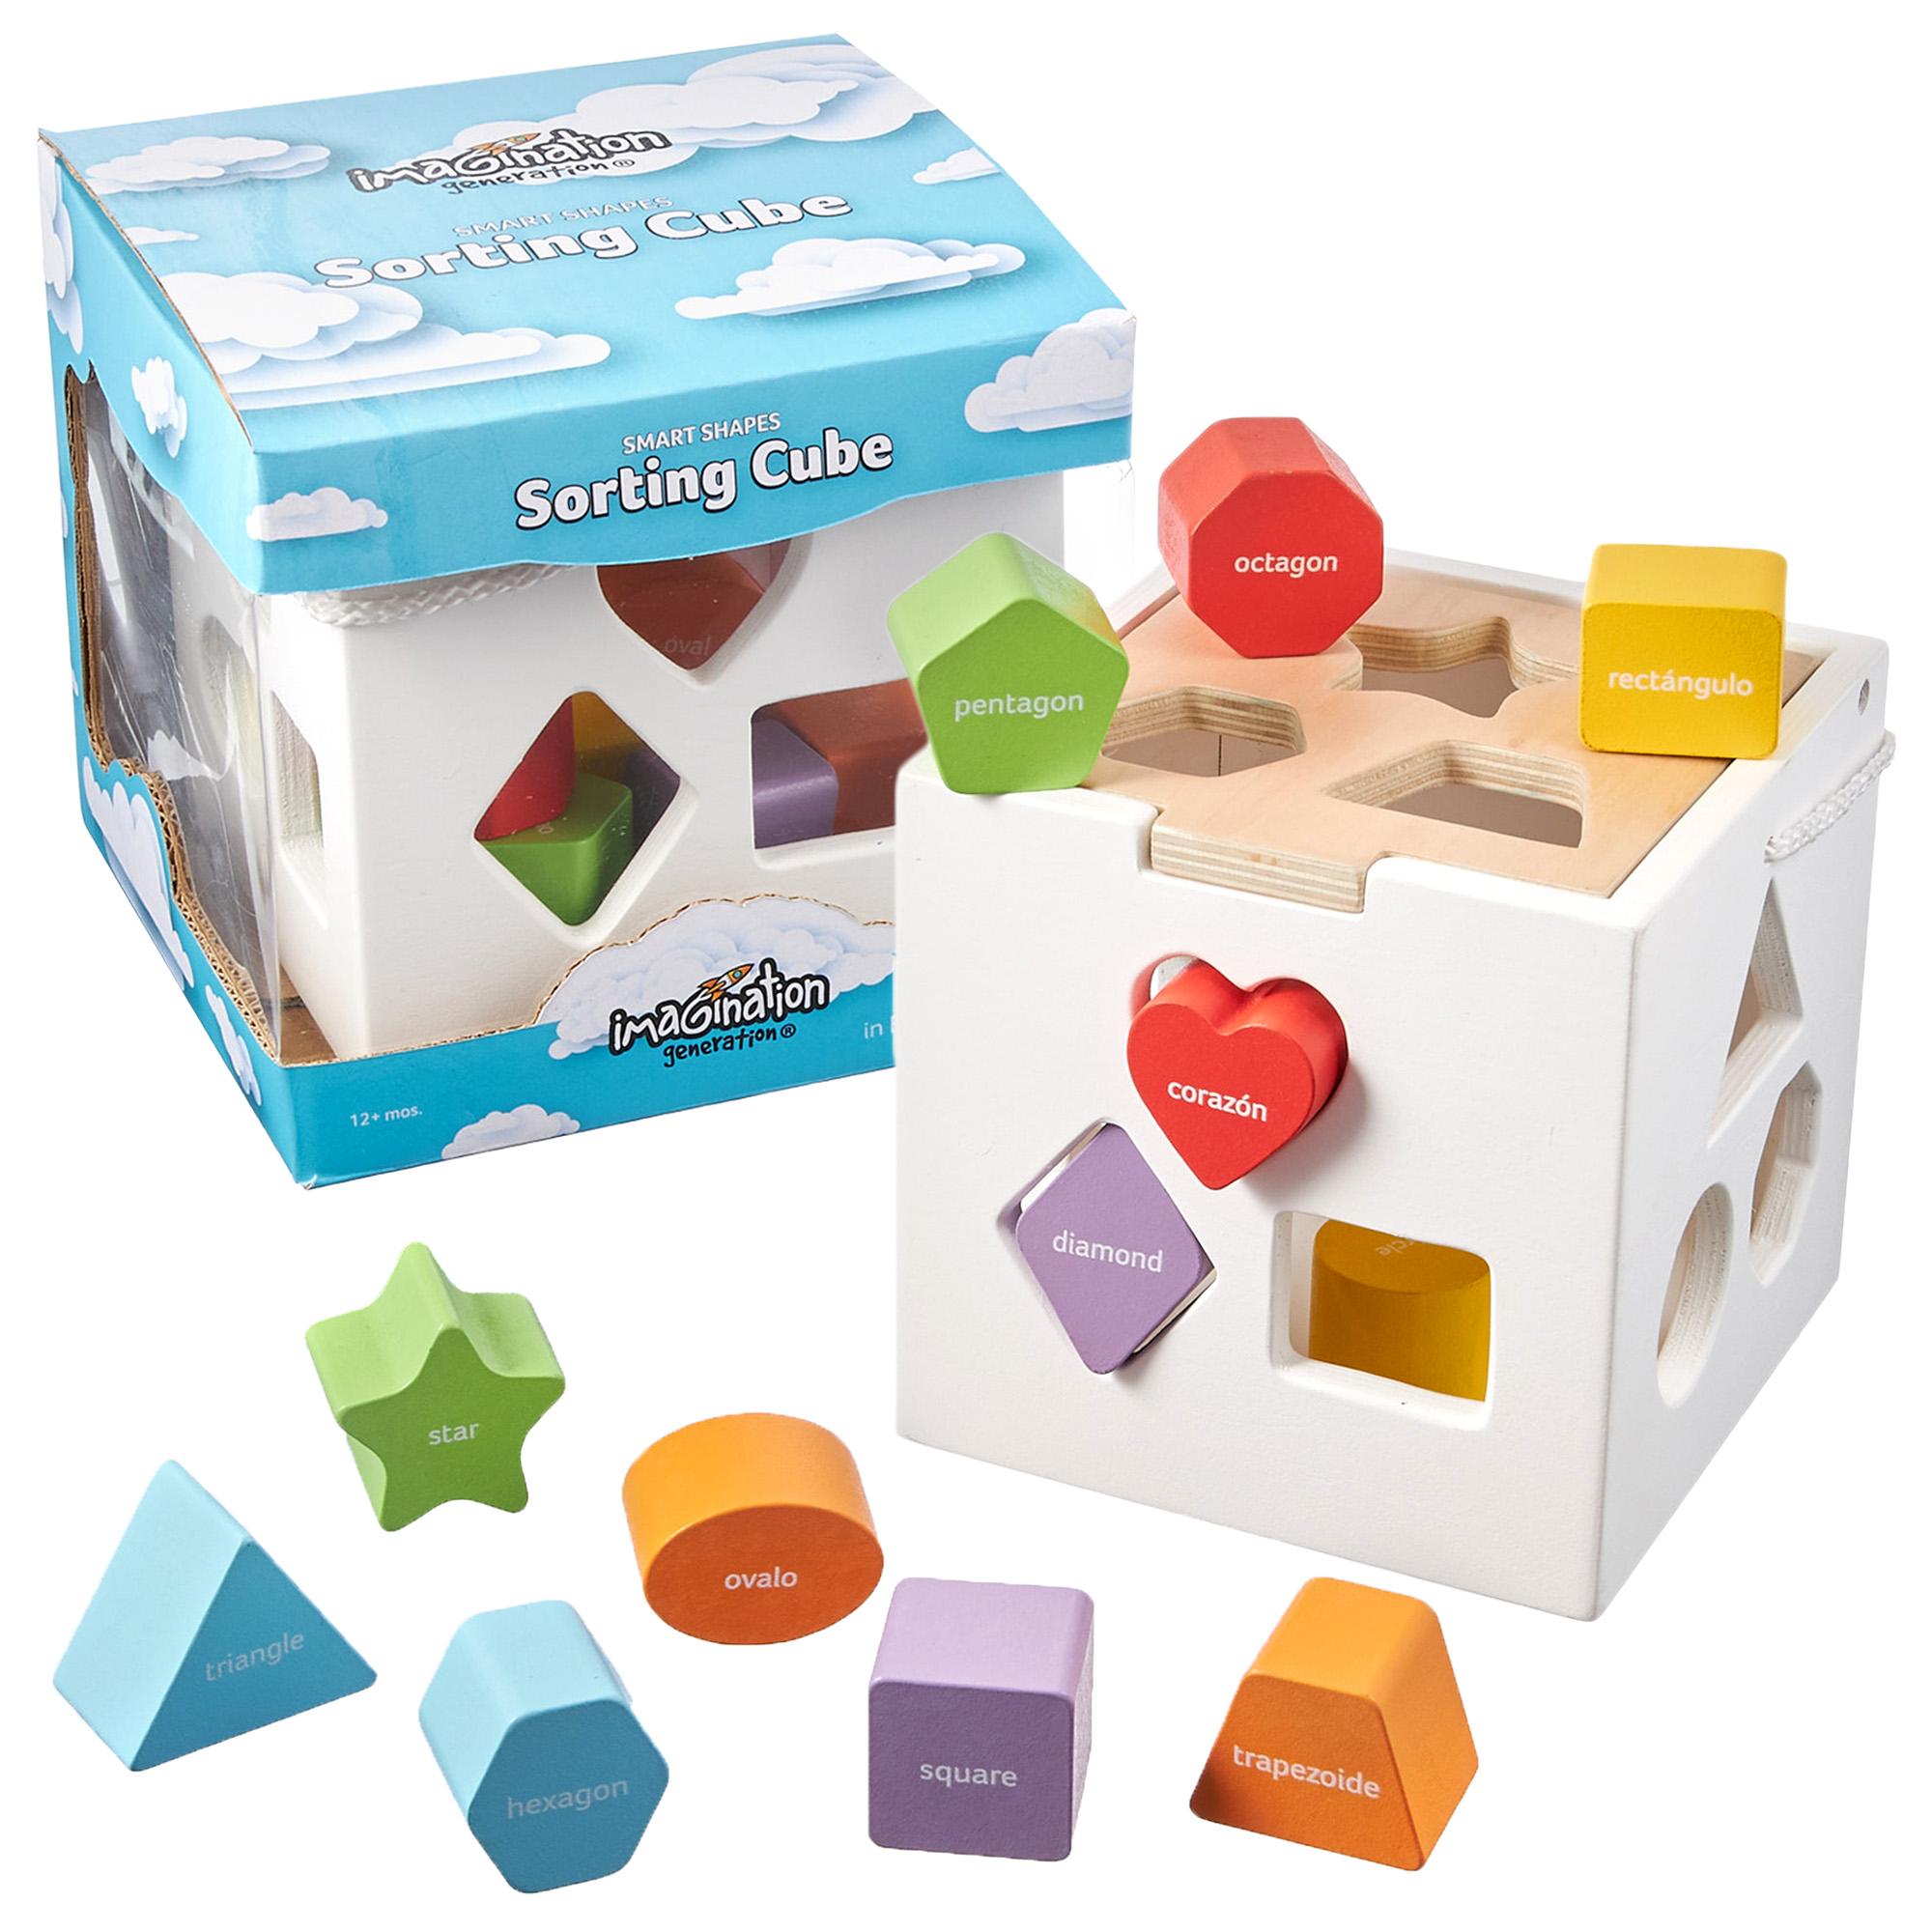 Smart Shapes Sorting Cube (2021)